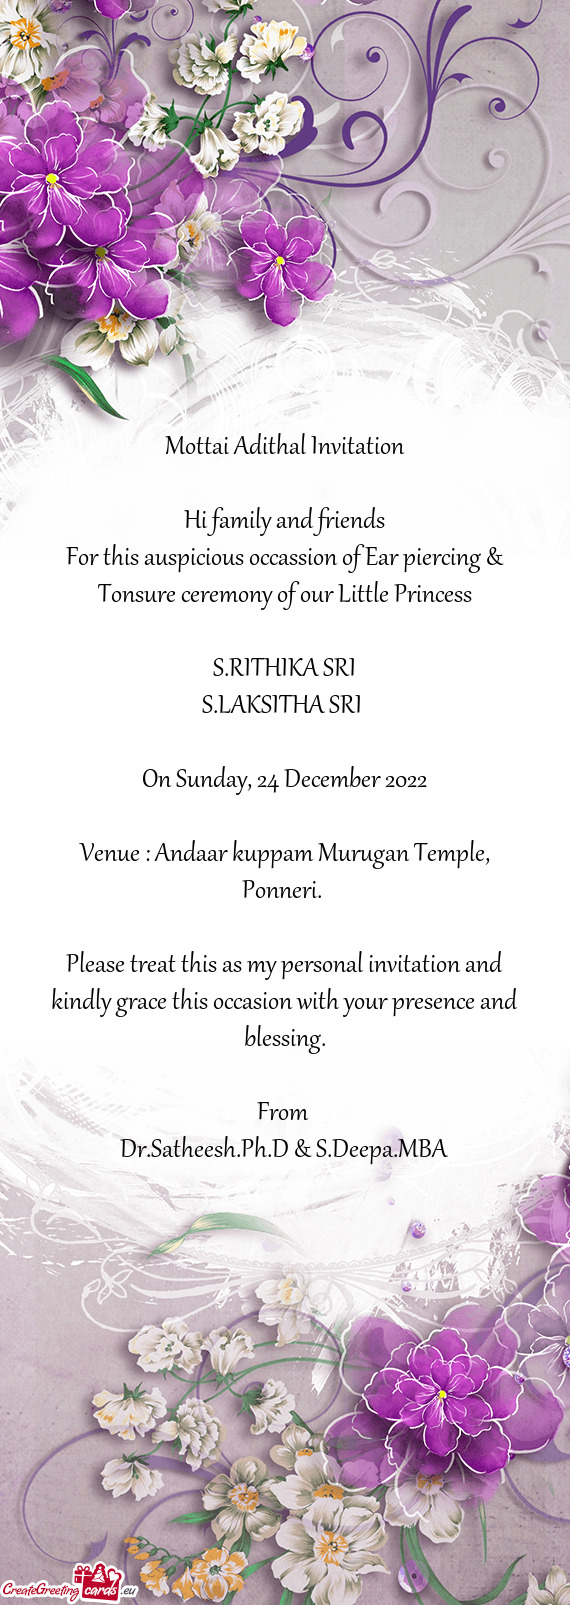 For this auspicious occassion of Ear piercing & Tonsure ceremony of our Little Princess